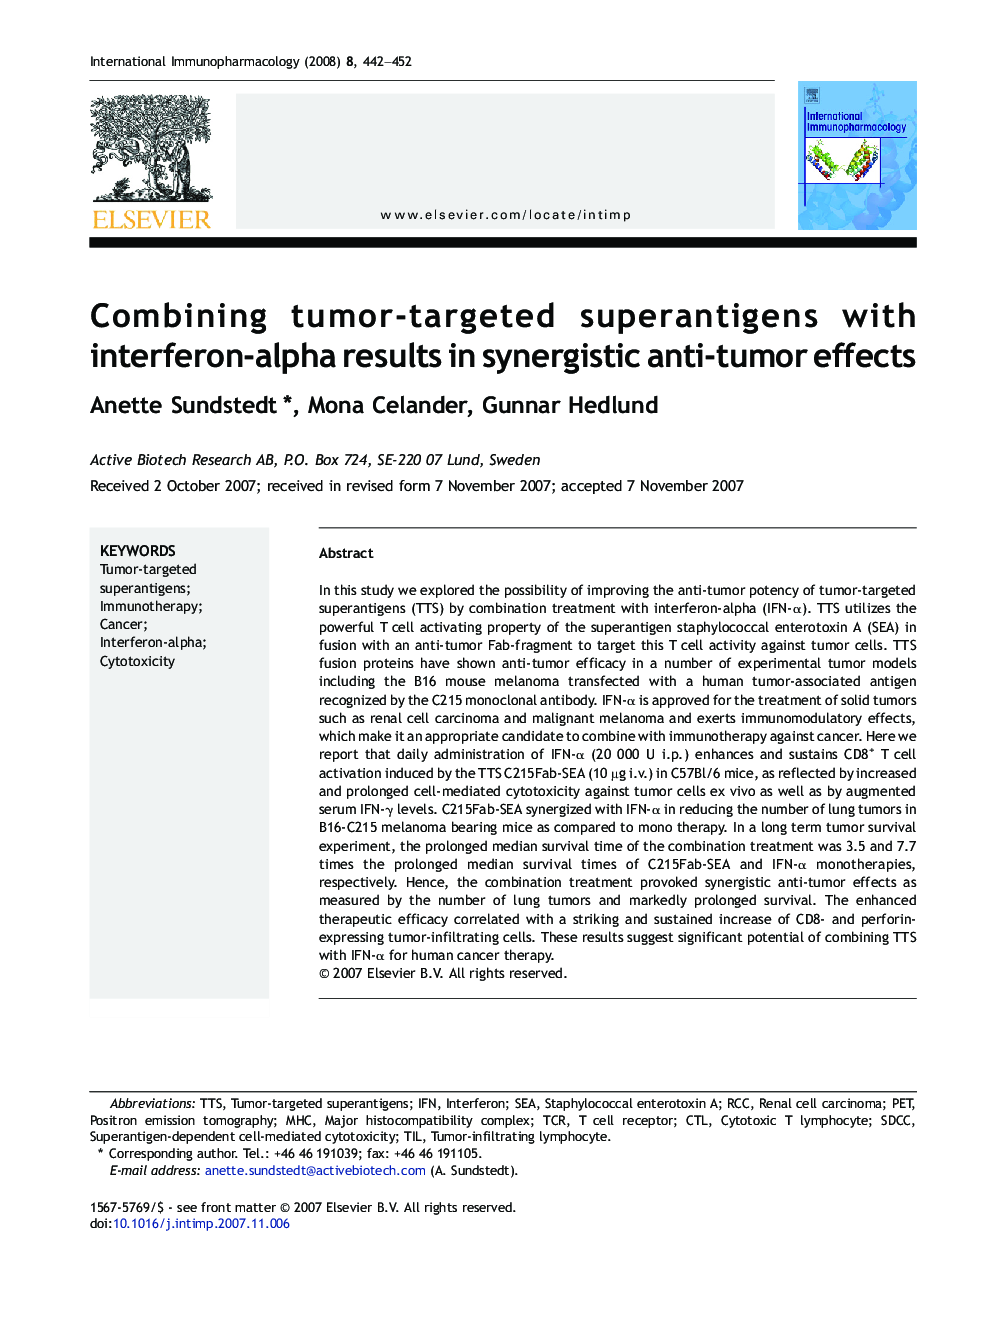 Combining tumor-targeted superantigens with interferon-alpha results in synergistic anti-tumor effects